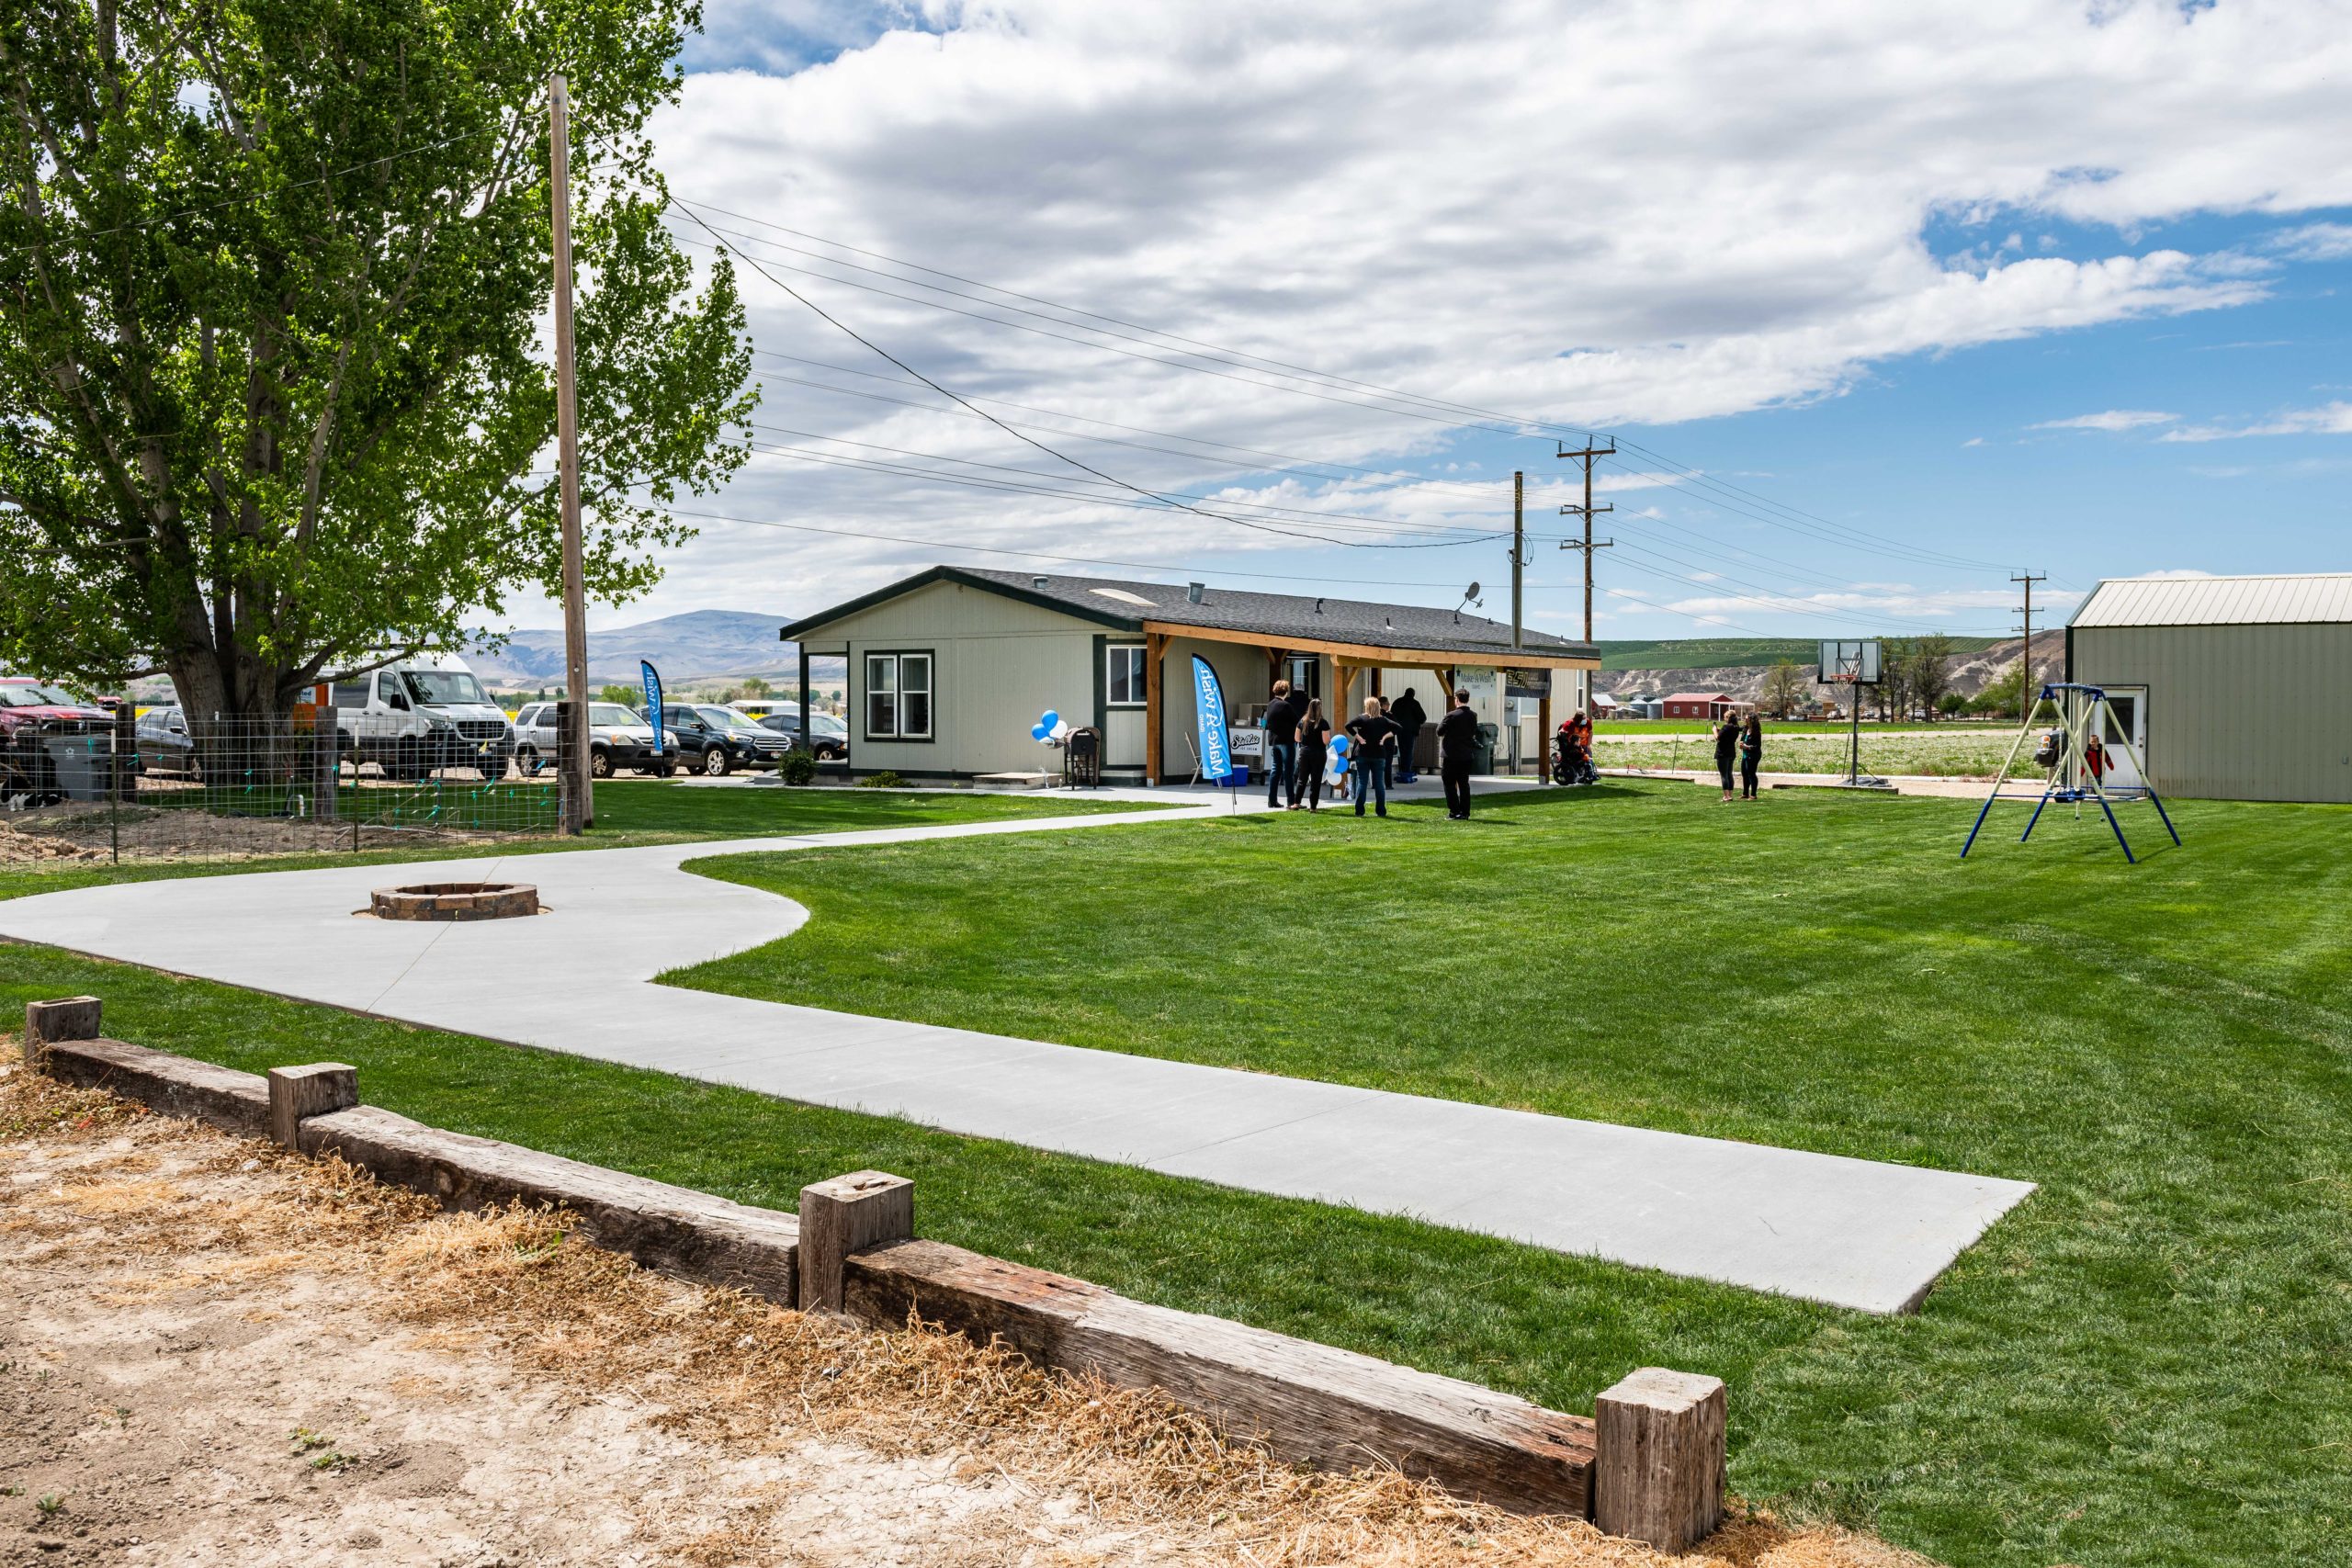 Image of ESI Cares and Make-a-Wish of Idaho's backyard renovation of the patio and fire pit.